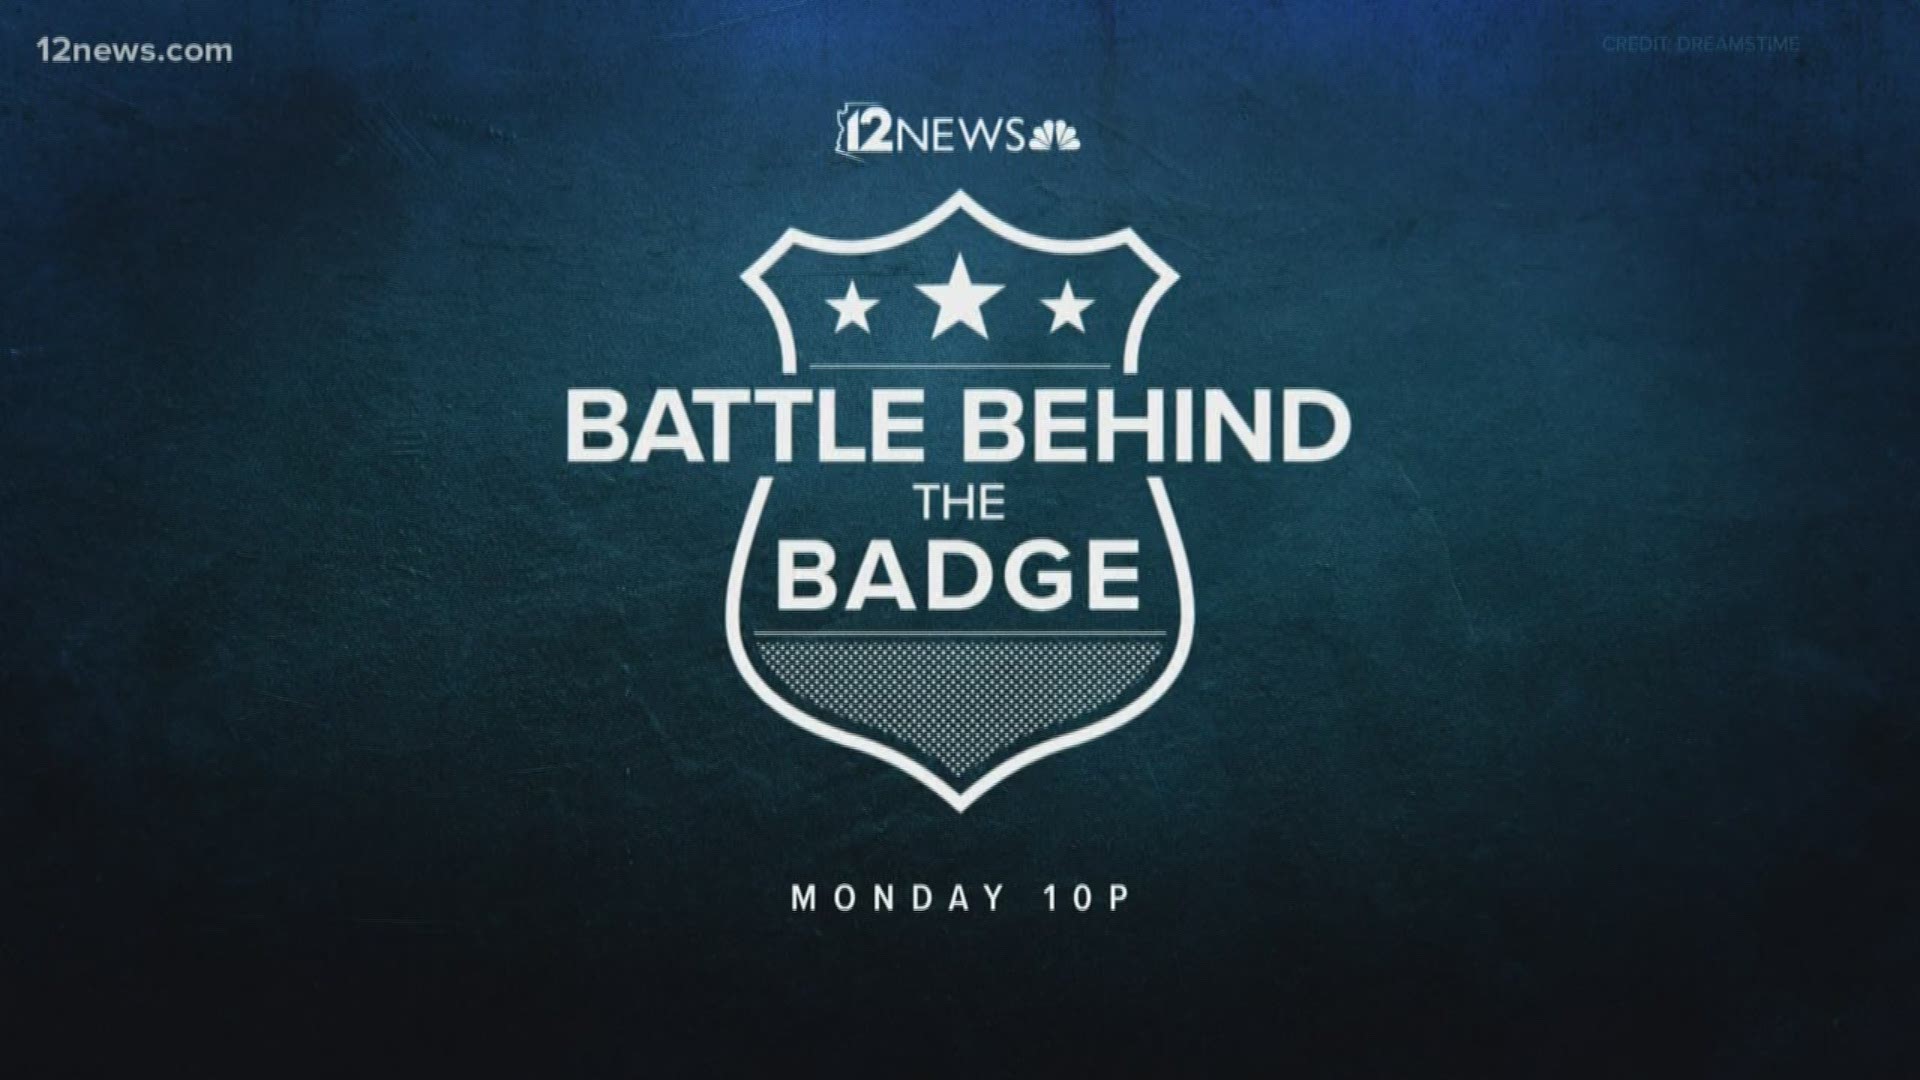 Only on 12 News: Battle Behind the Badge. Team 12's Bianca Buono has the story at 10 p.m. on Monday.